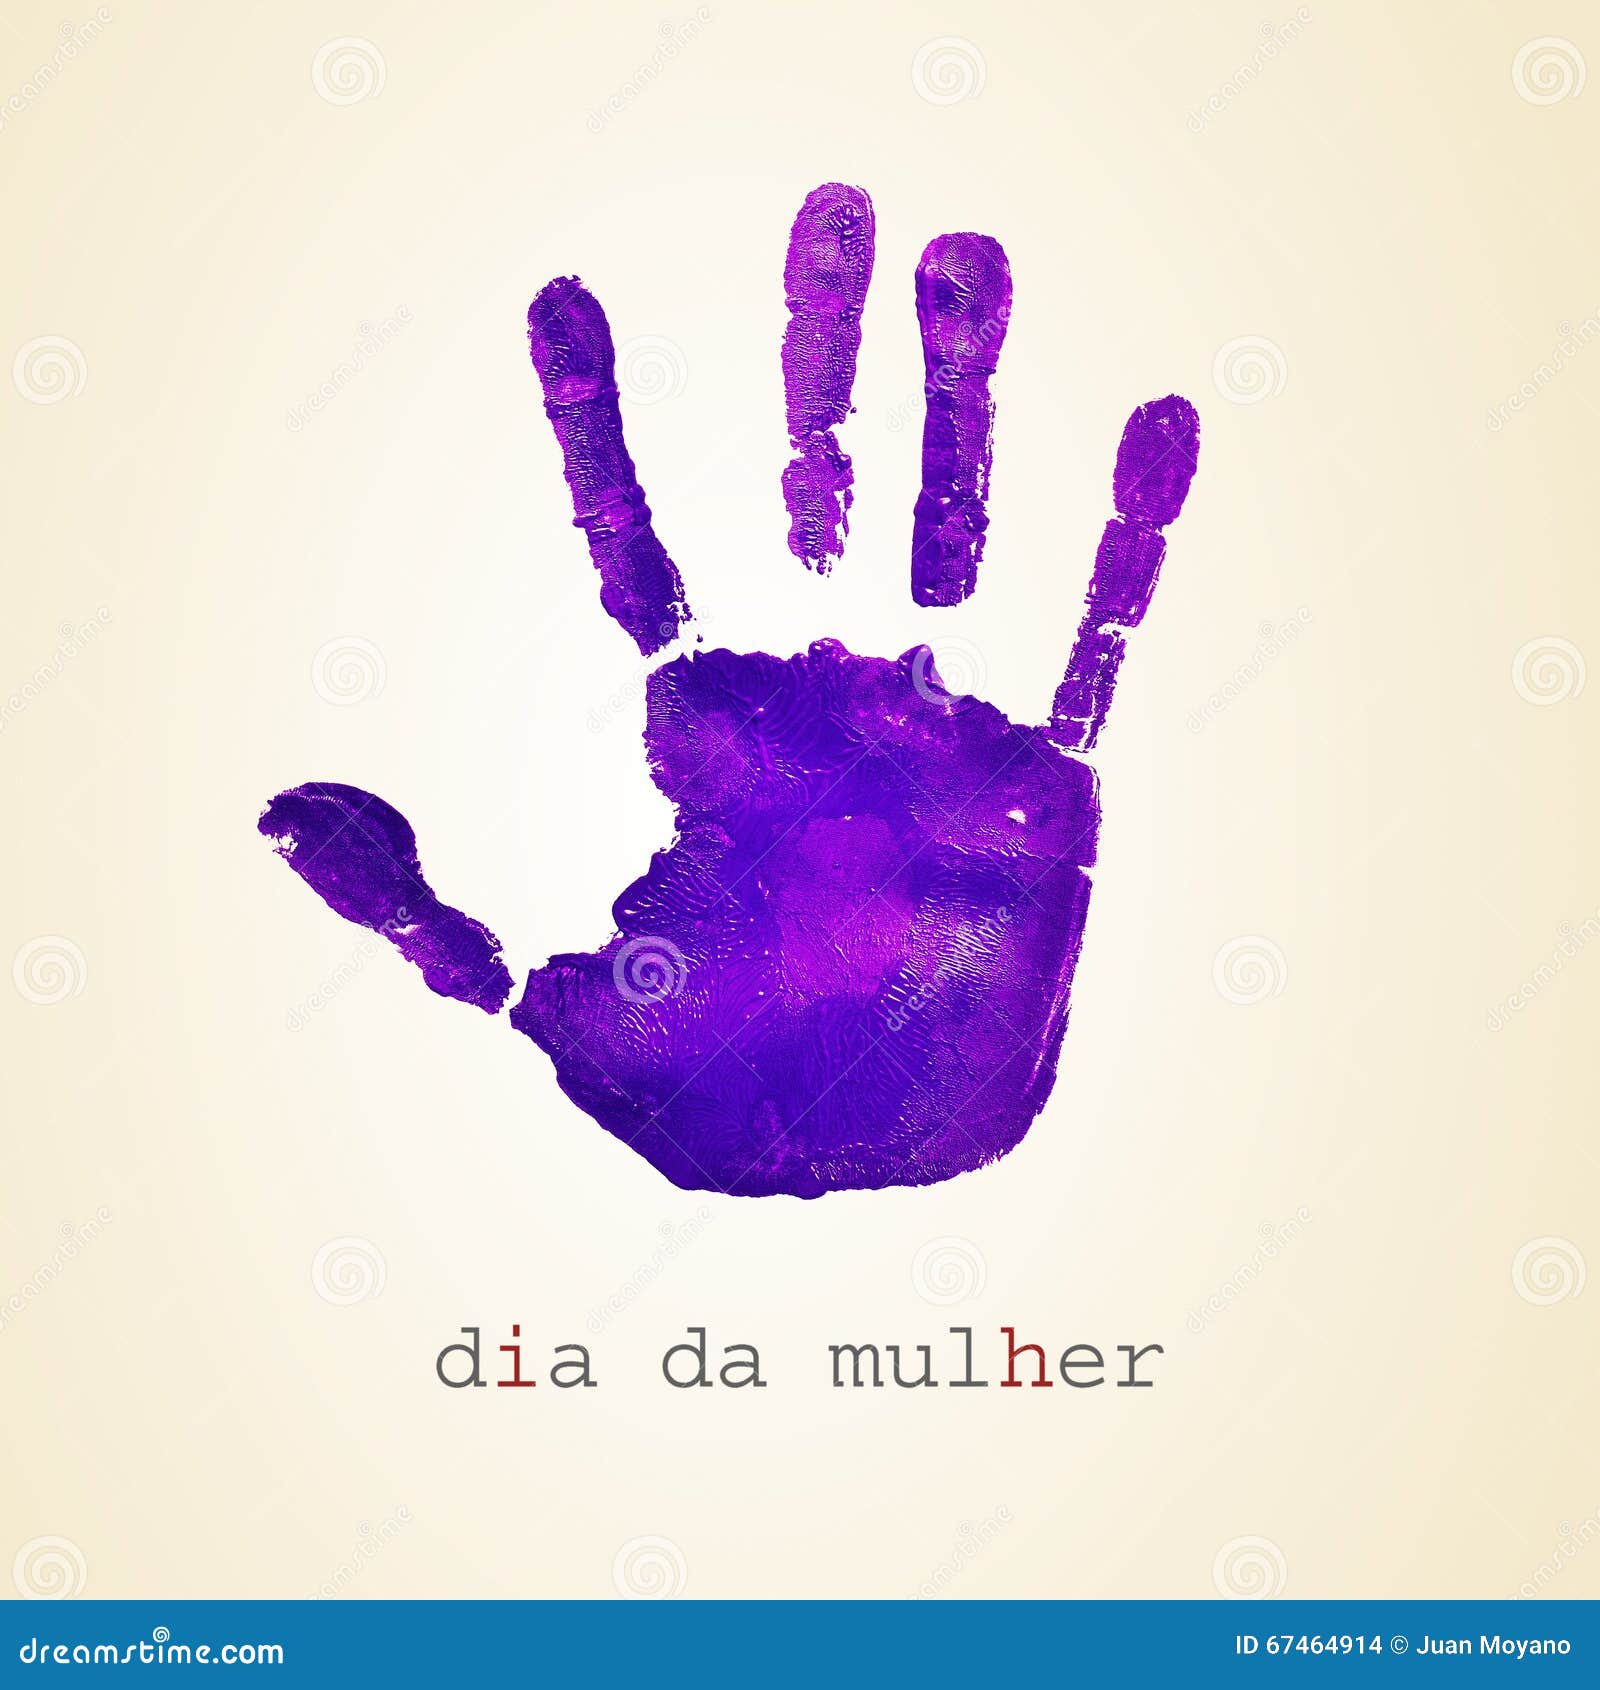 violet handprint and text dia da mulher, womens day in portuguese